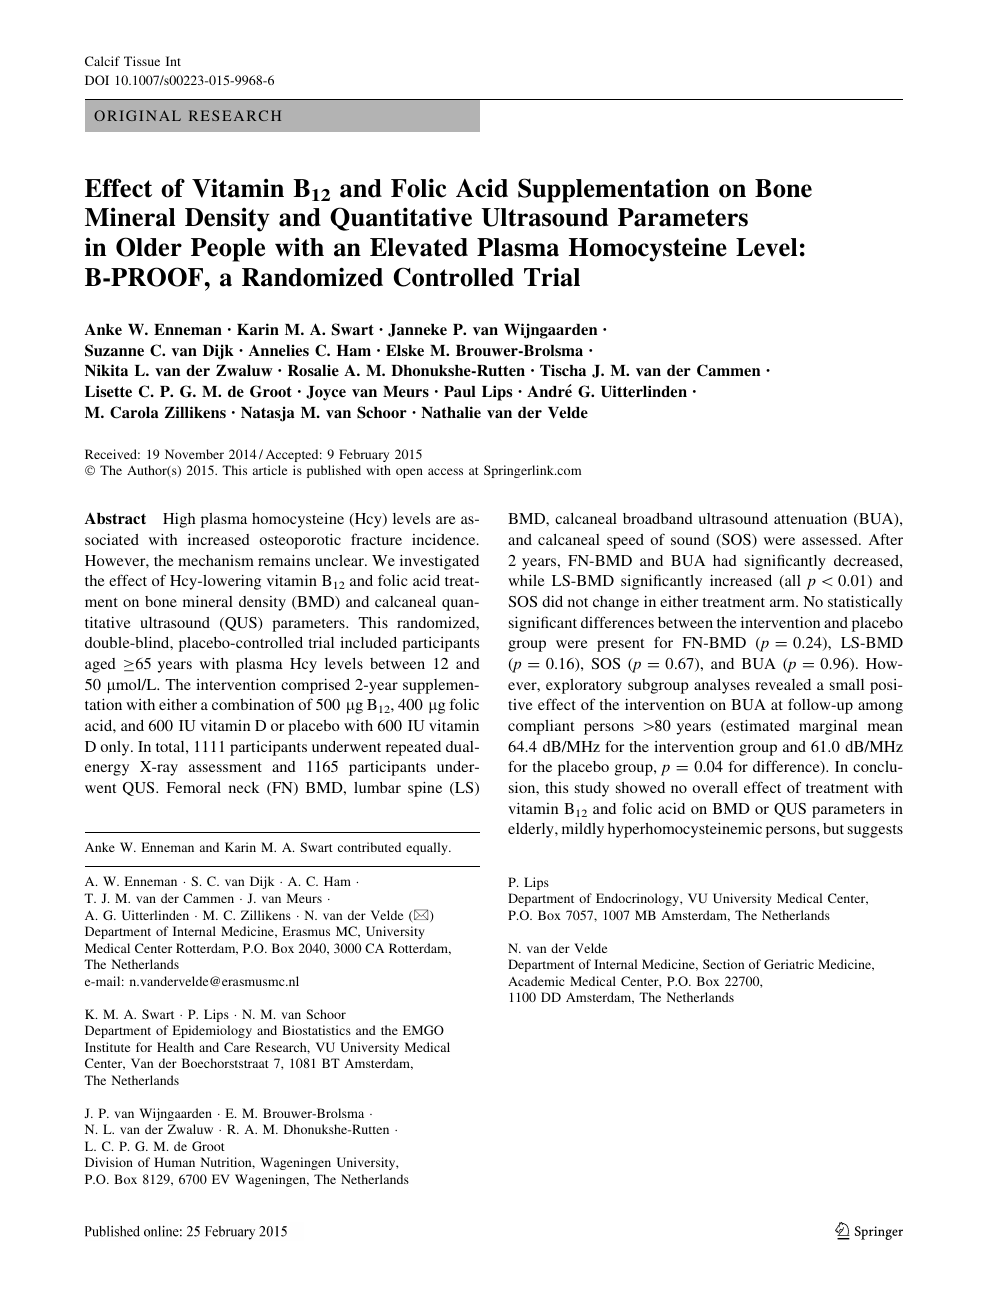 Effect Of Vitamin B12 And Folic Acid Supplementation On Bone Mineral Density And Quantitative Ultrasound Parameters In Older People With An Elevated Plasma Homocysteine Level B Proof A Randomized Controlled Trial Topic